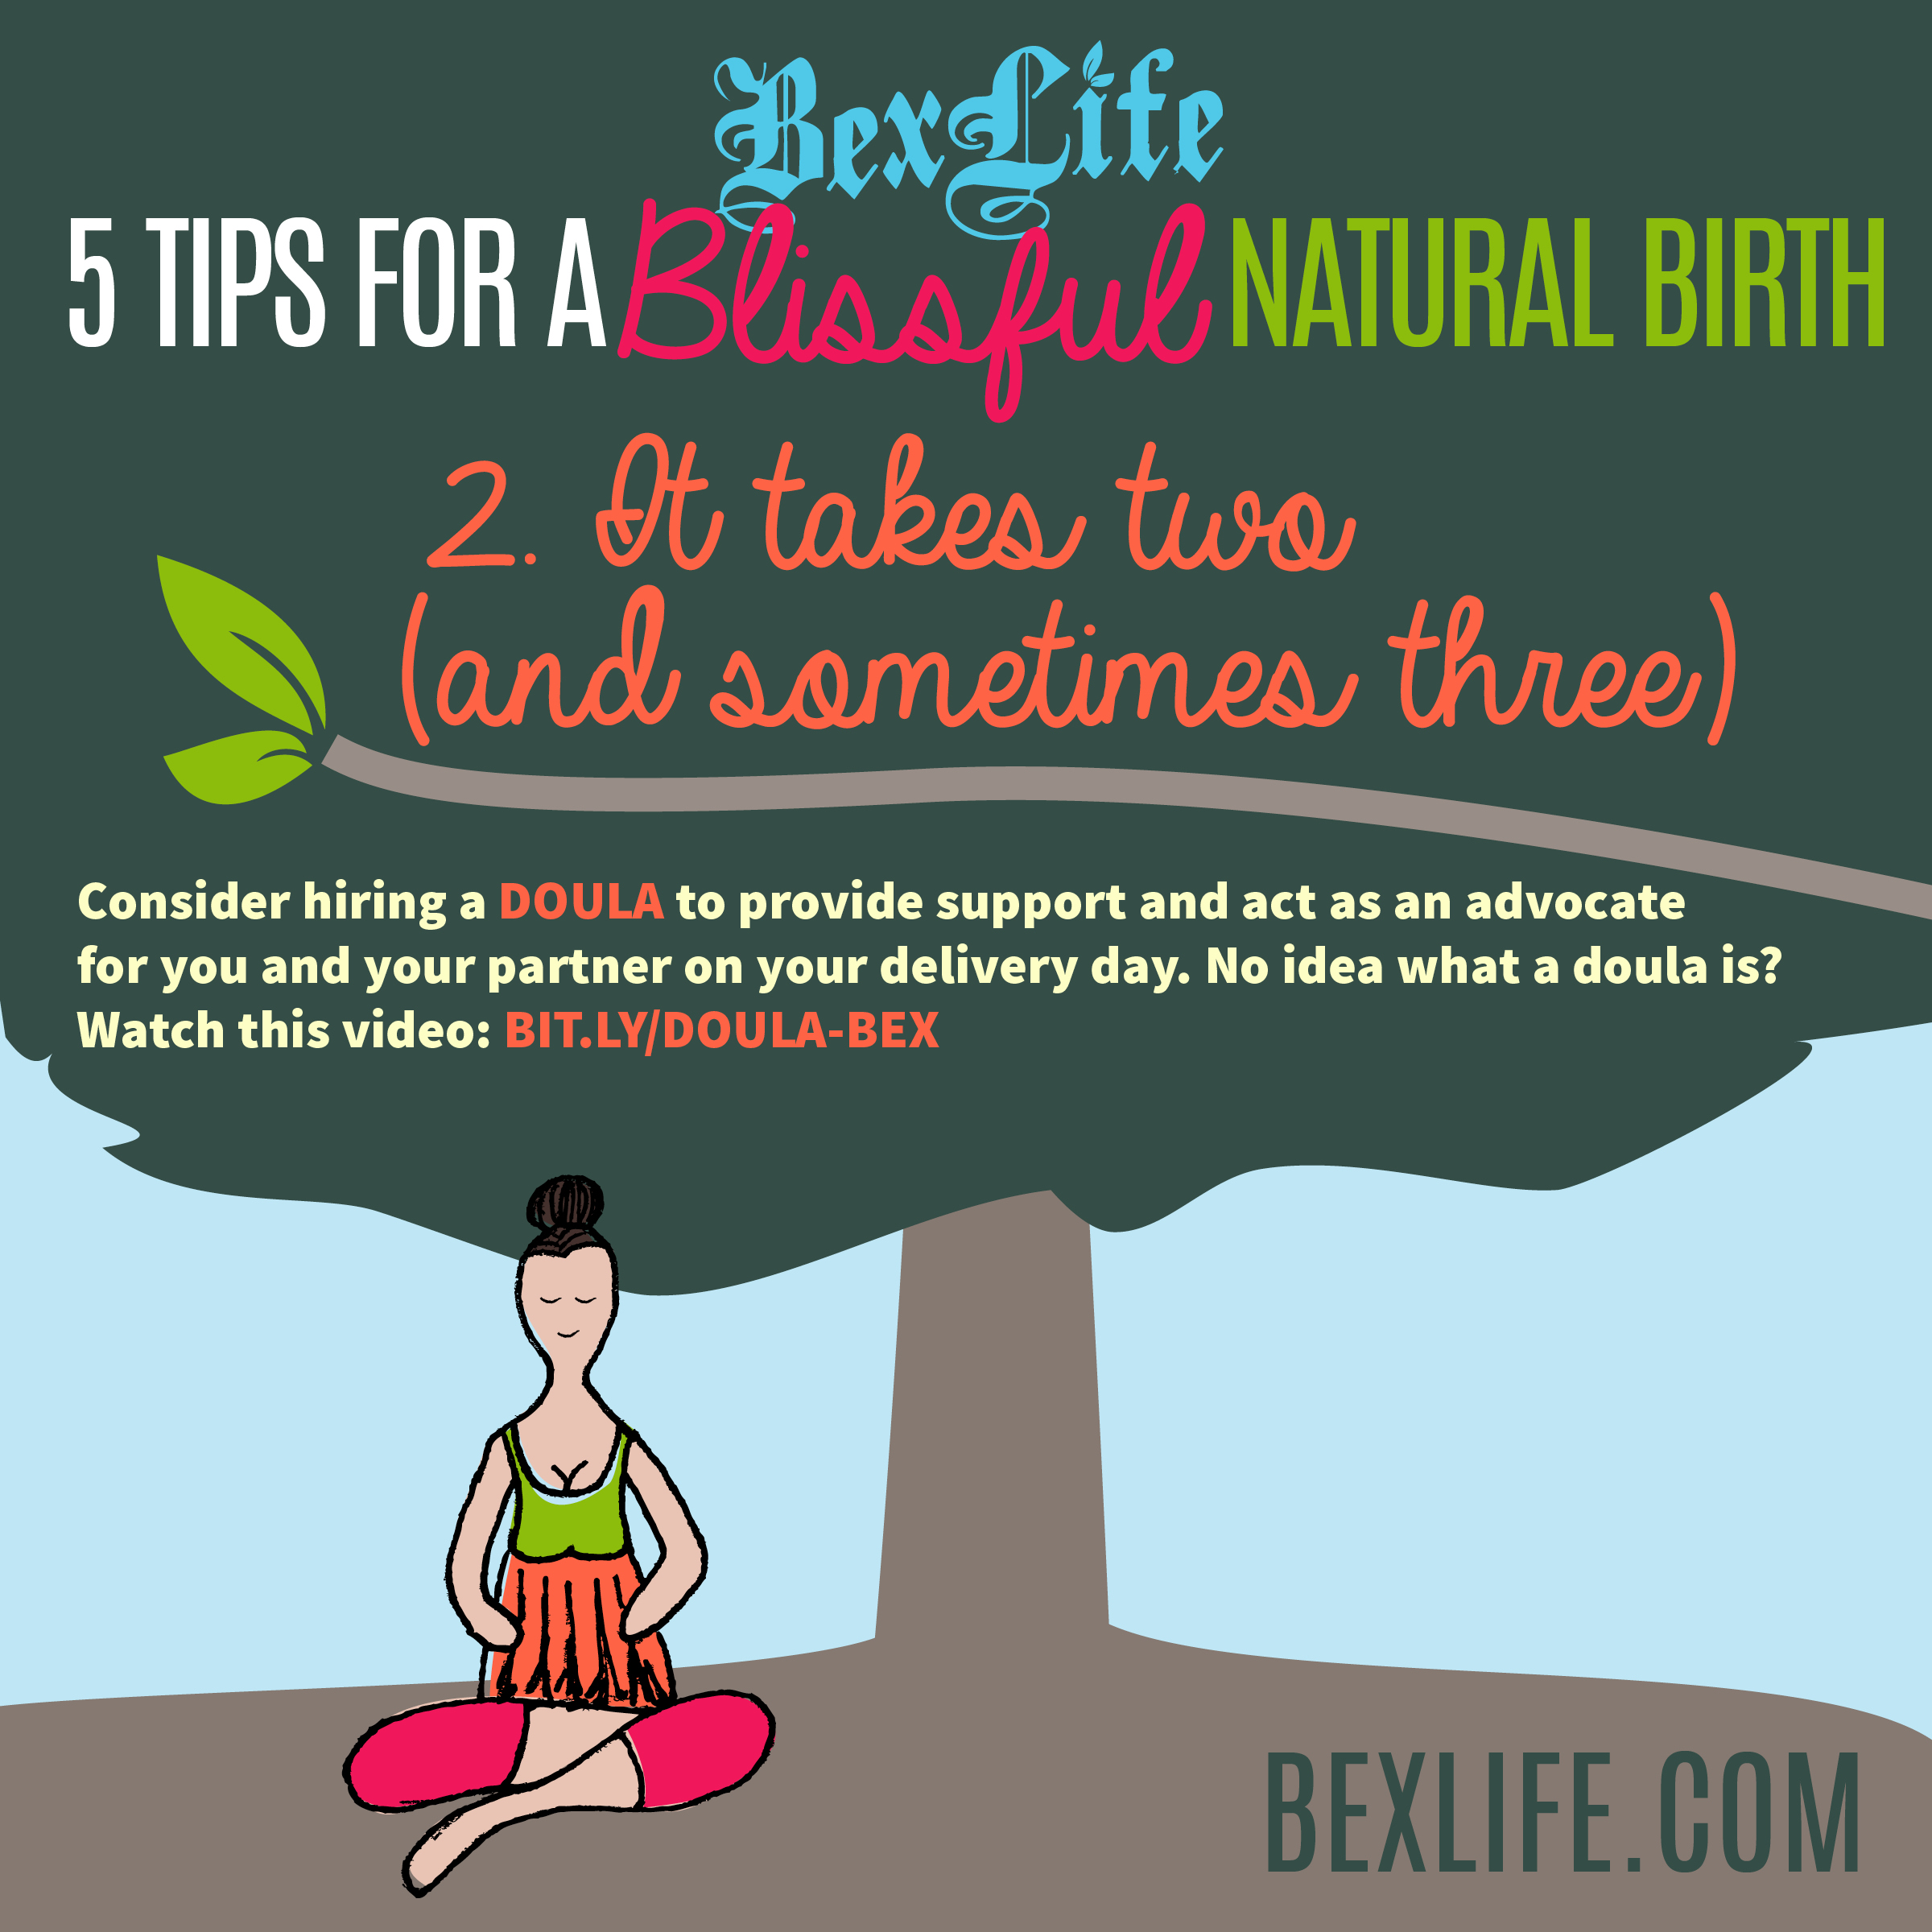 5 Tips for a Blissful Natural Birth